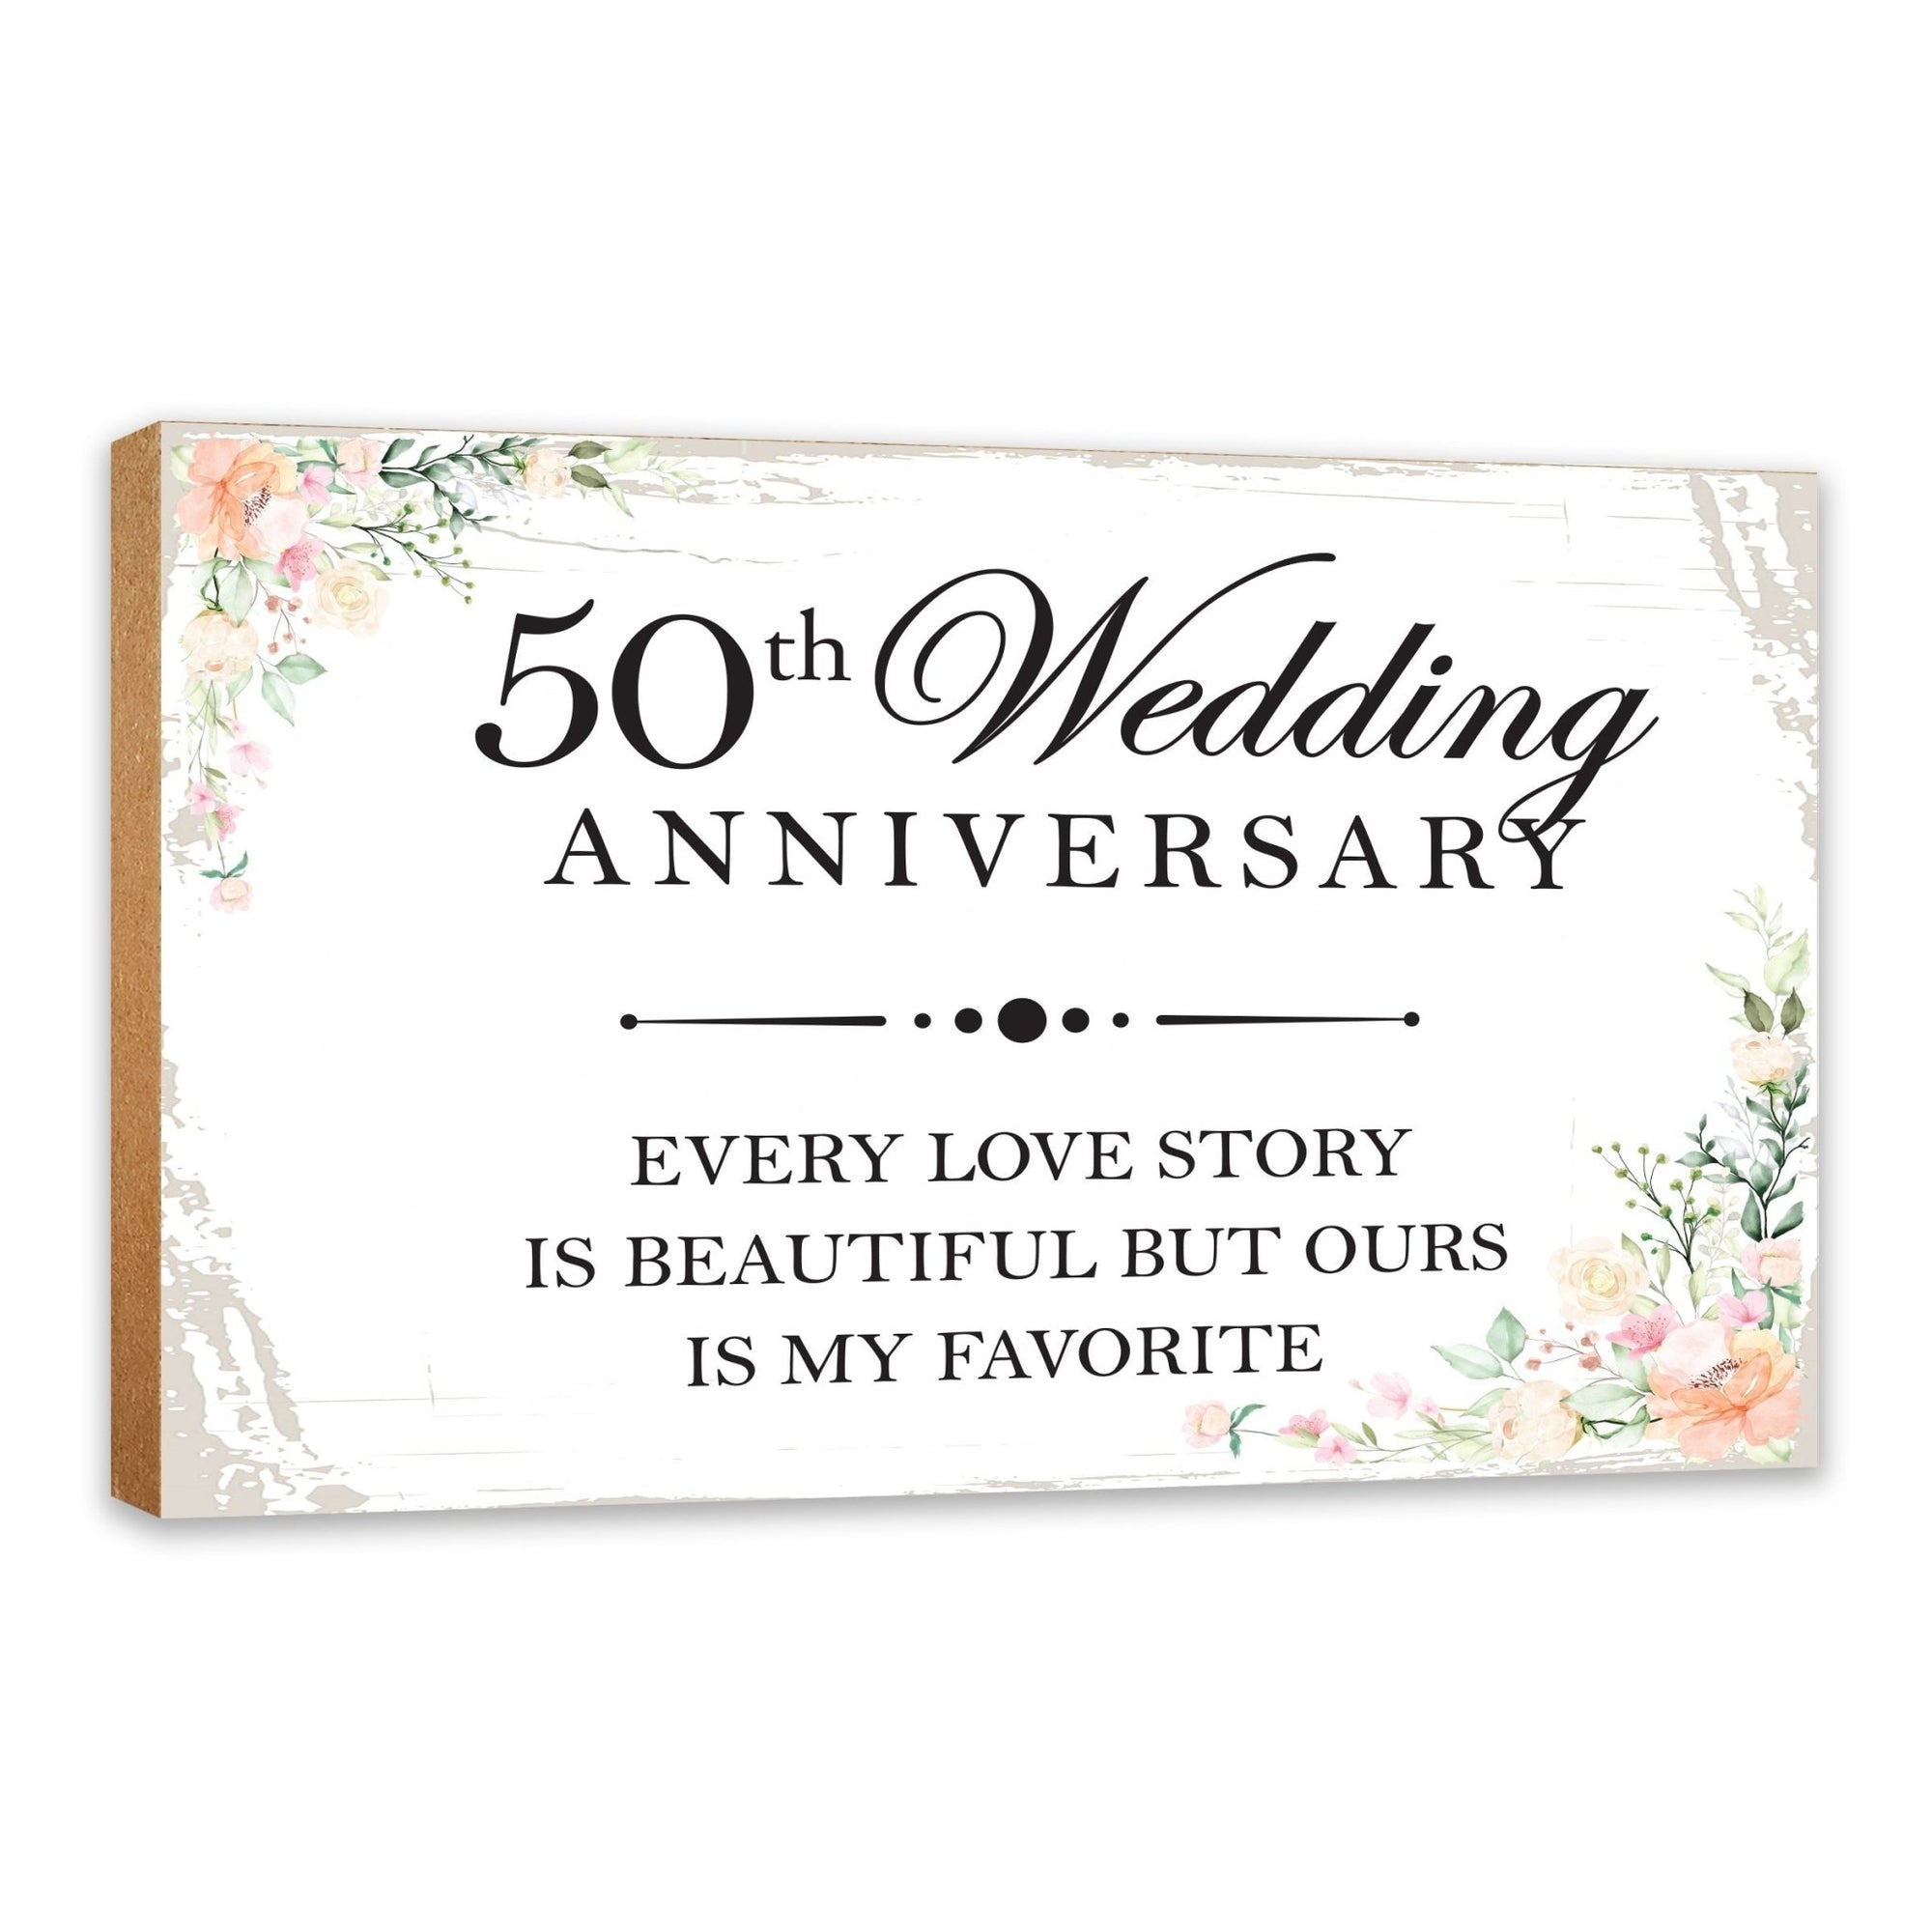 50th Wedding Anniversary Unique Shelf Decor and Tabletop Signs Gifts for Couples - Every Love Story - LifeSong Milestones